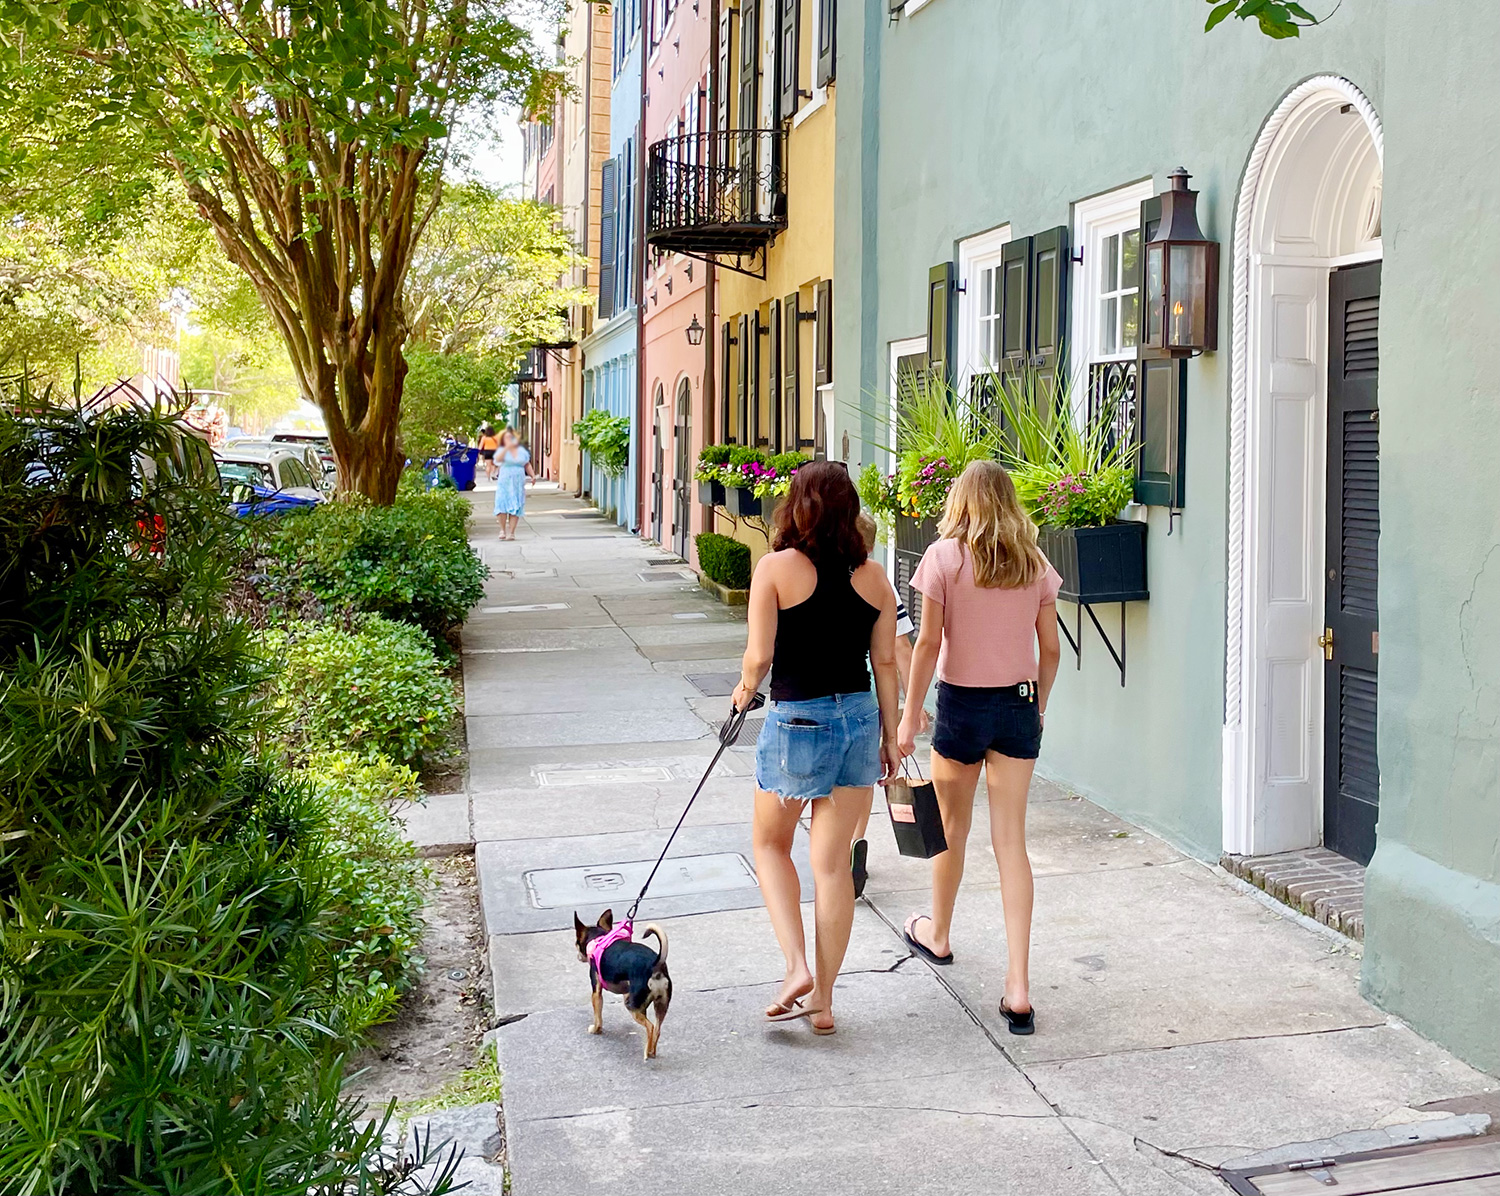 Charleston Was Just Named the No. 1 City in the U.S. by T+L Readers